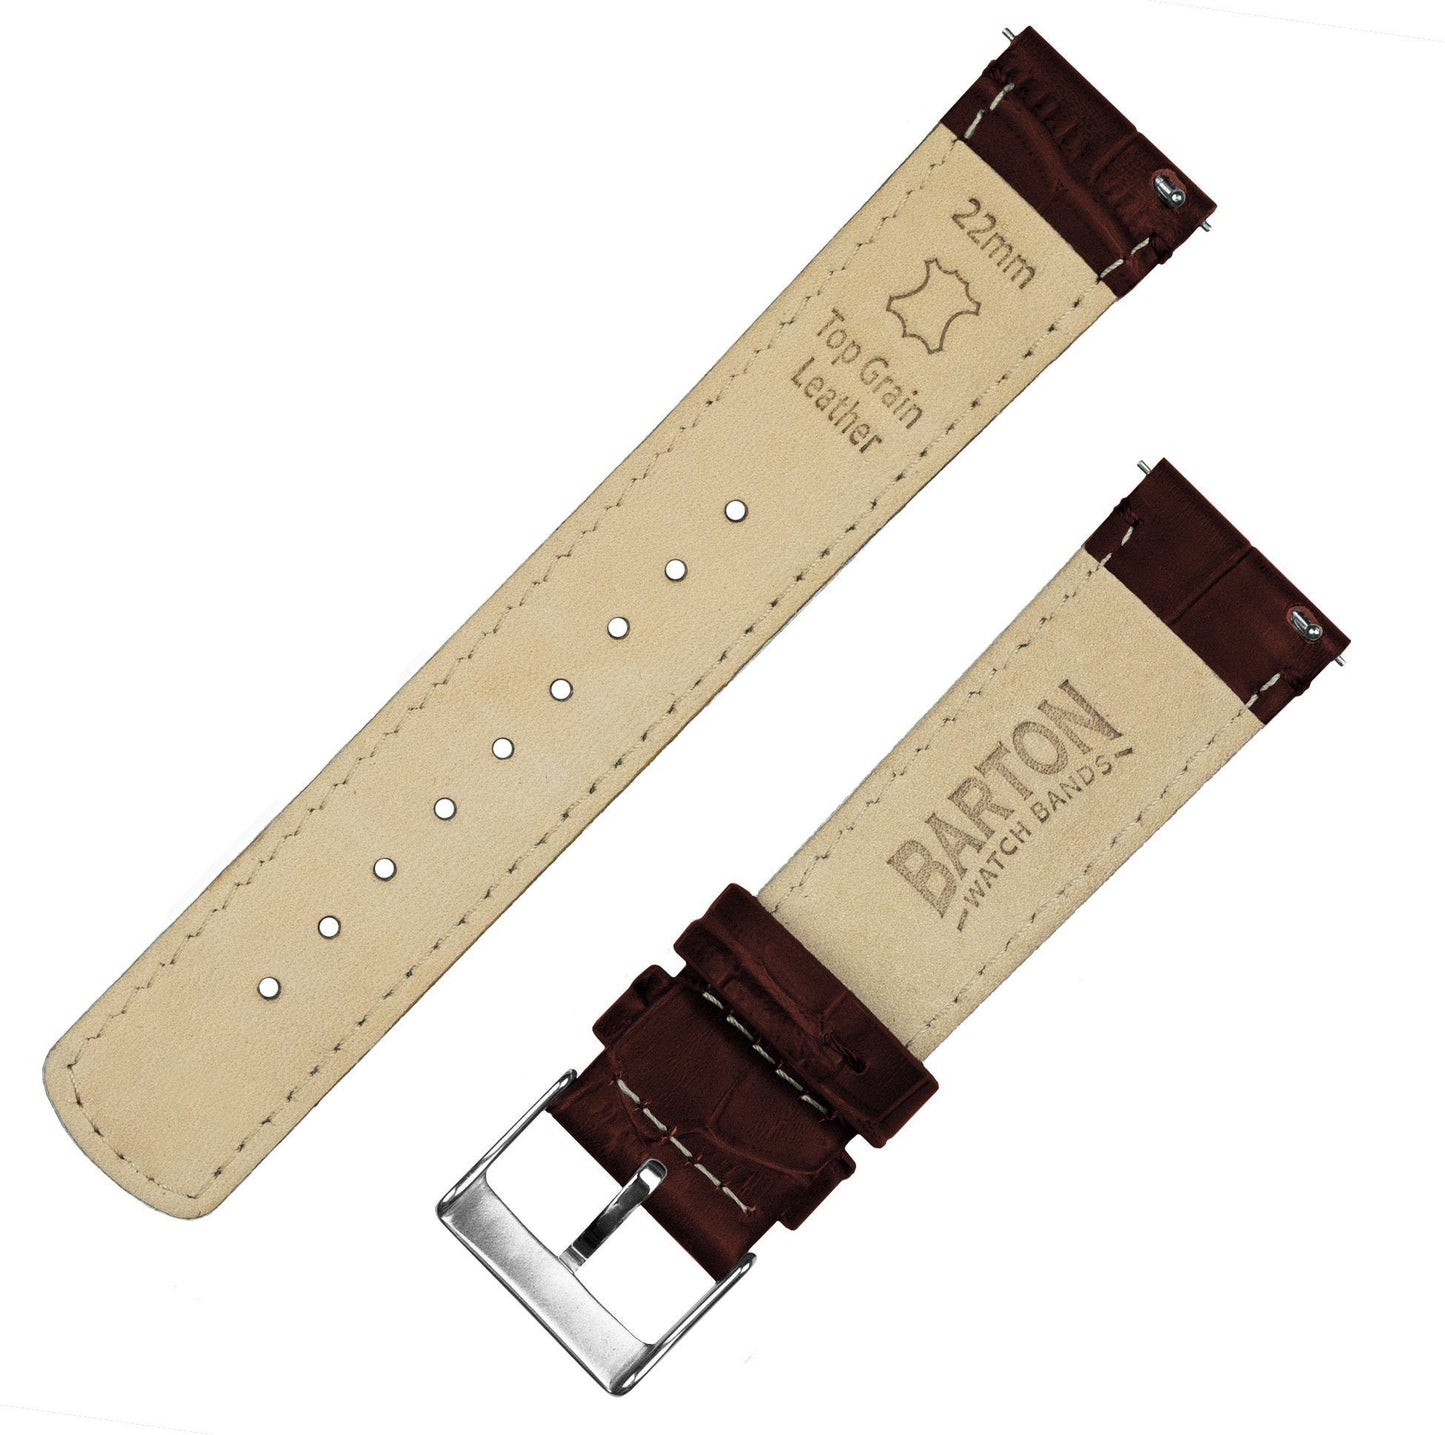 Withings Nokia Activité and Steel HR | Coffee Brown Alligator Grain Leather - Barton Watch Bands